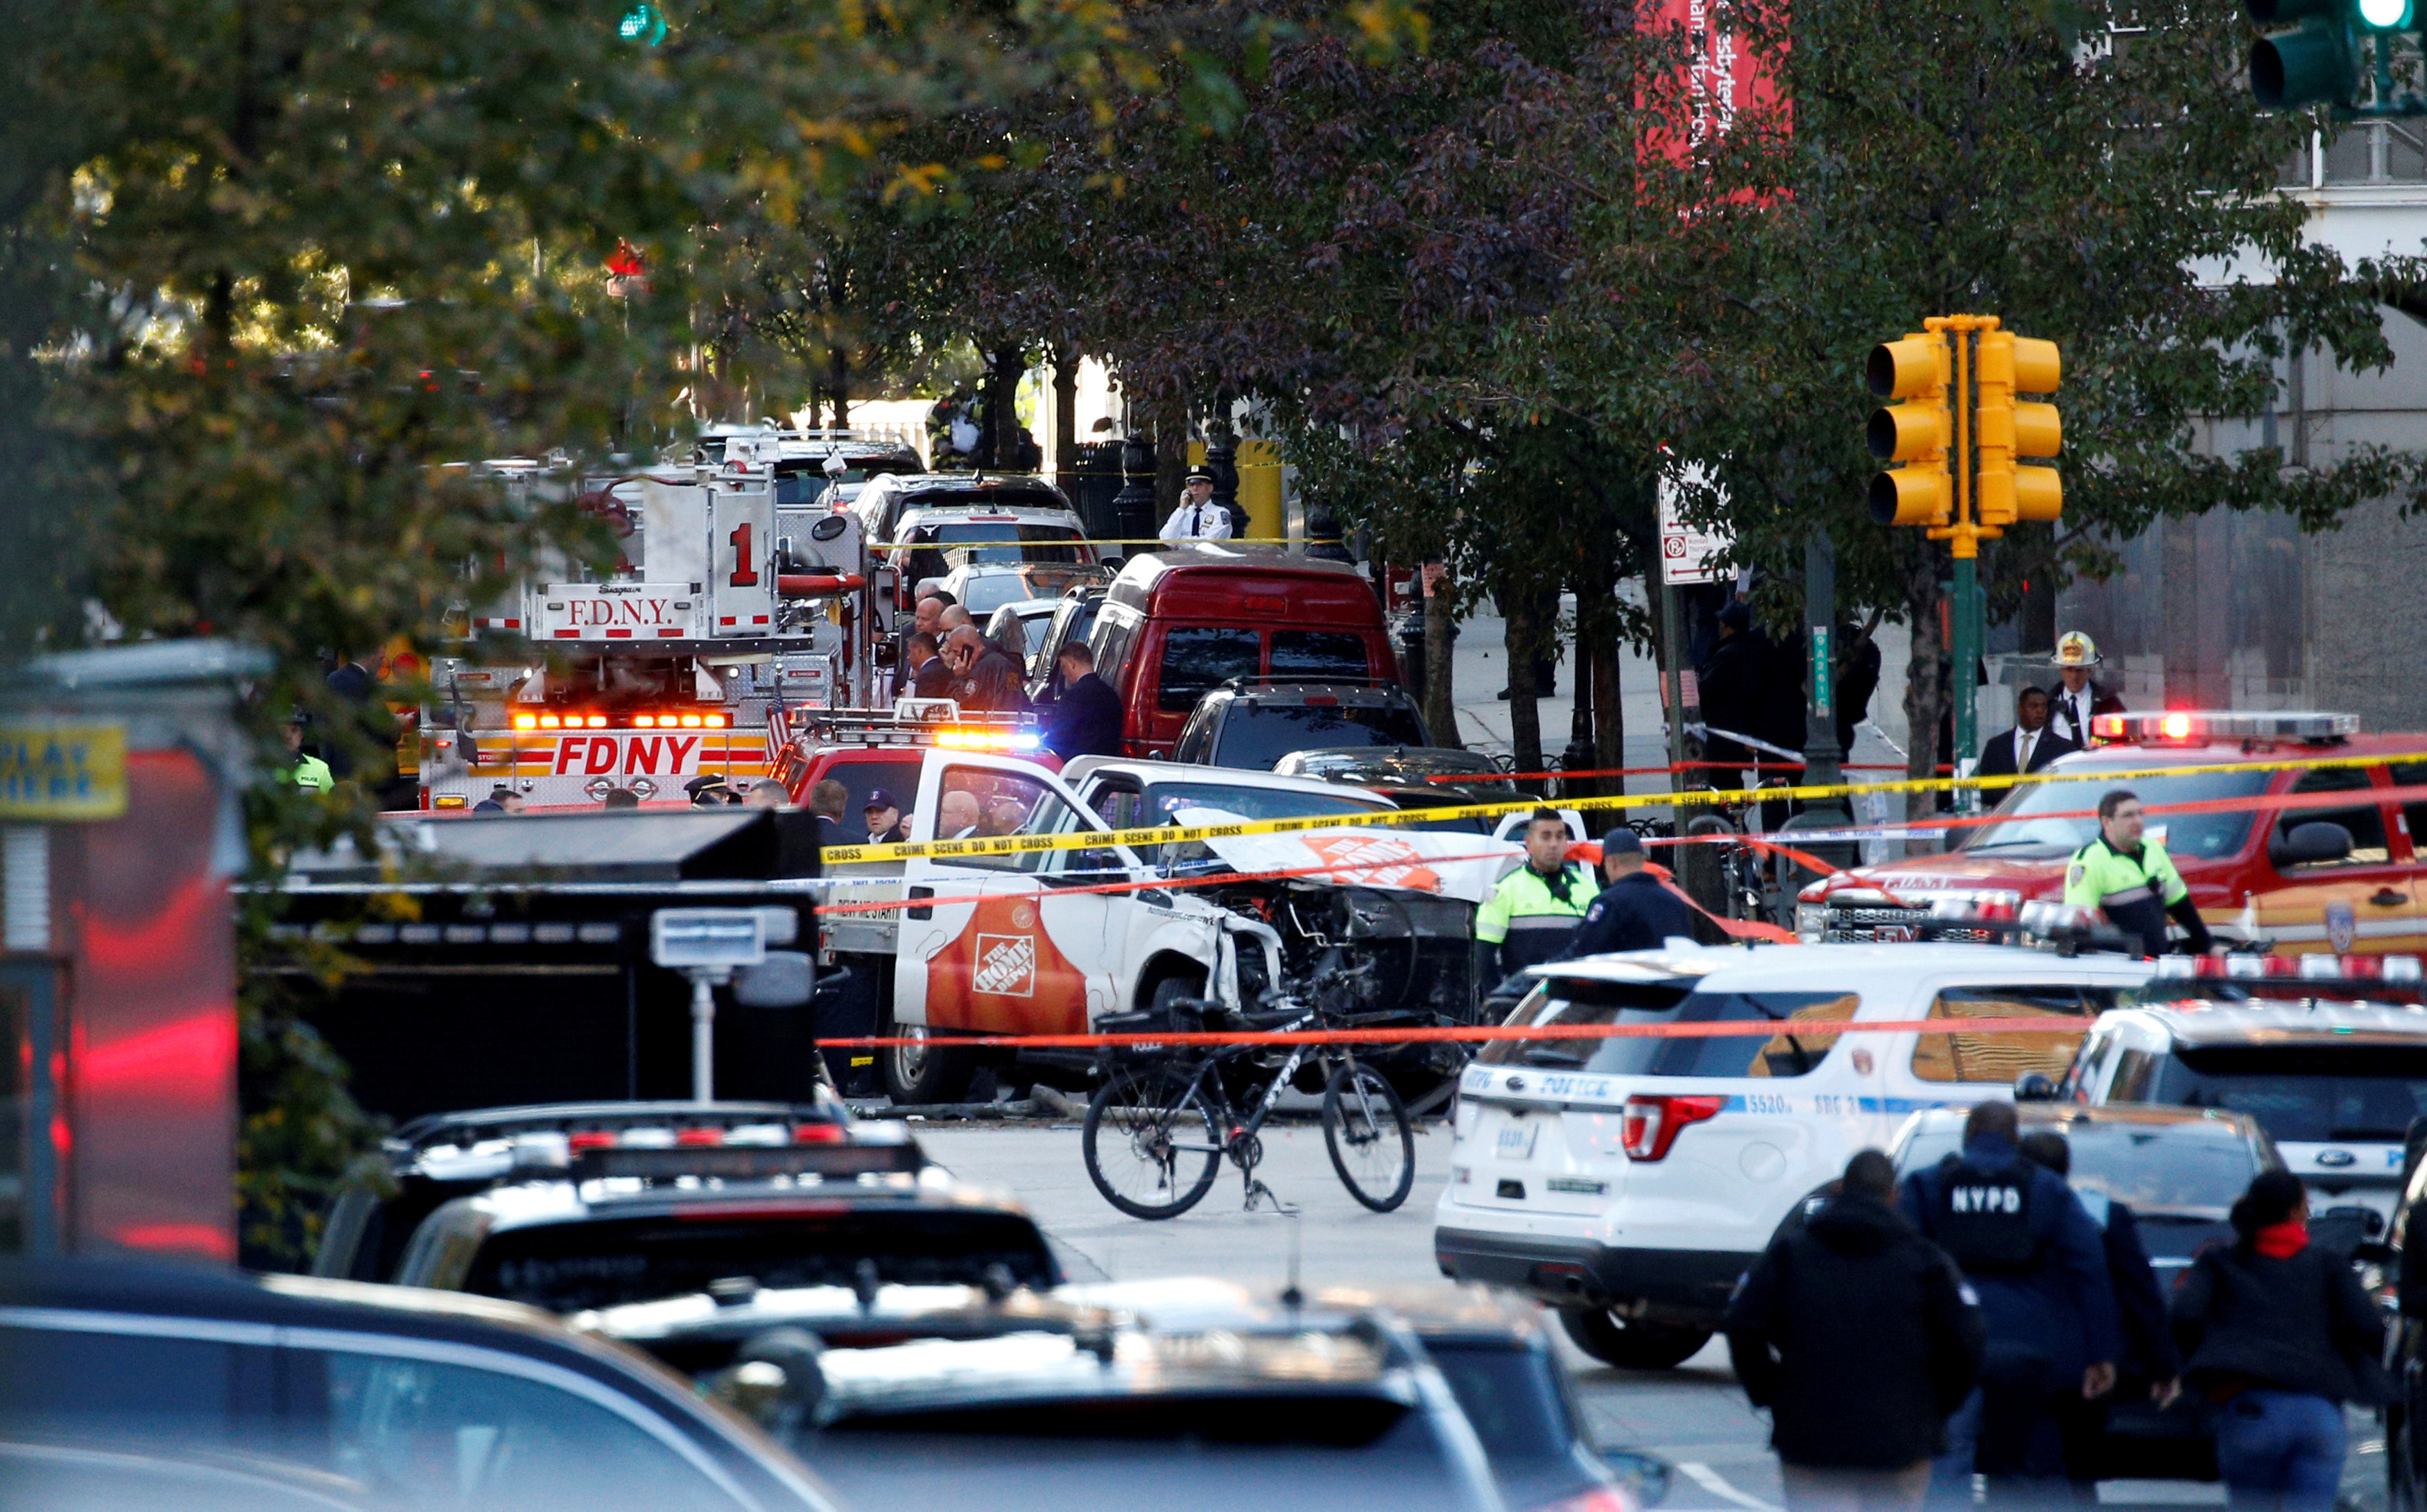 REFILE - ADDING INFORMATION   A Home Depot truck which struck down multiple people on a bike path, killing several and injuring numerous others, is seen as New York city first responders are at the crime scene in lower Manhattan in New York, NY, U.S., October 31, 2017.  REUTERS/Brendan McDermid     TPX IMAGES OF THE DAY